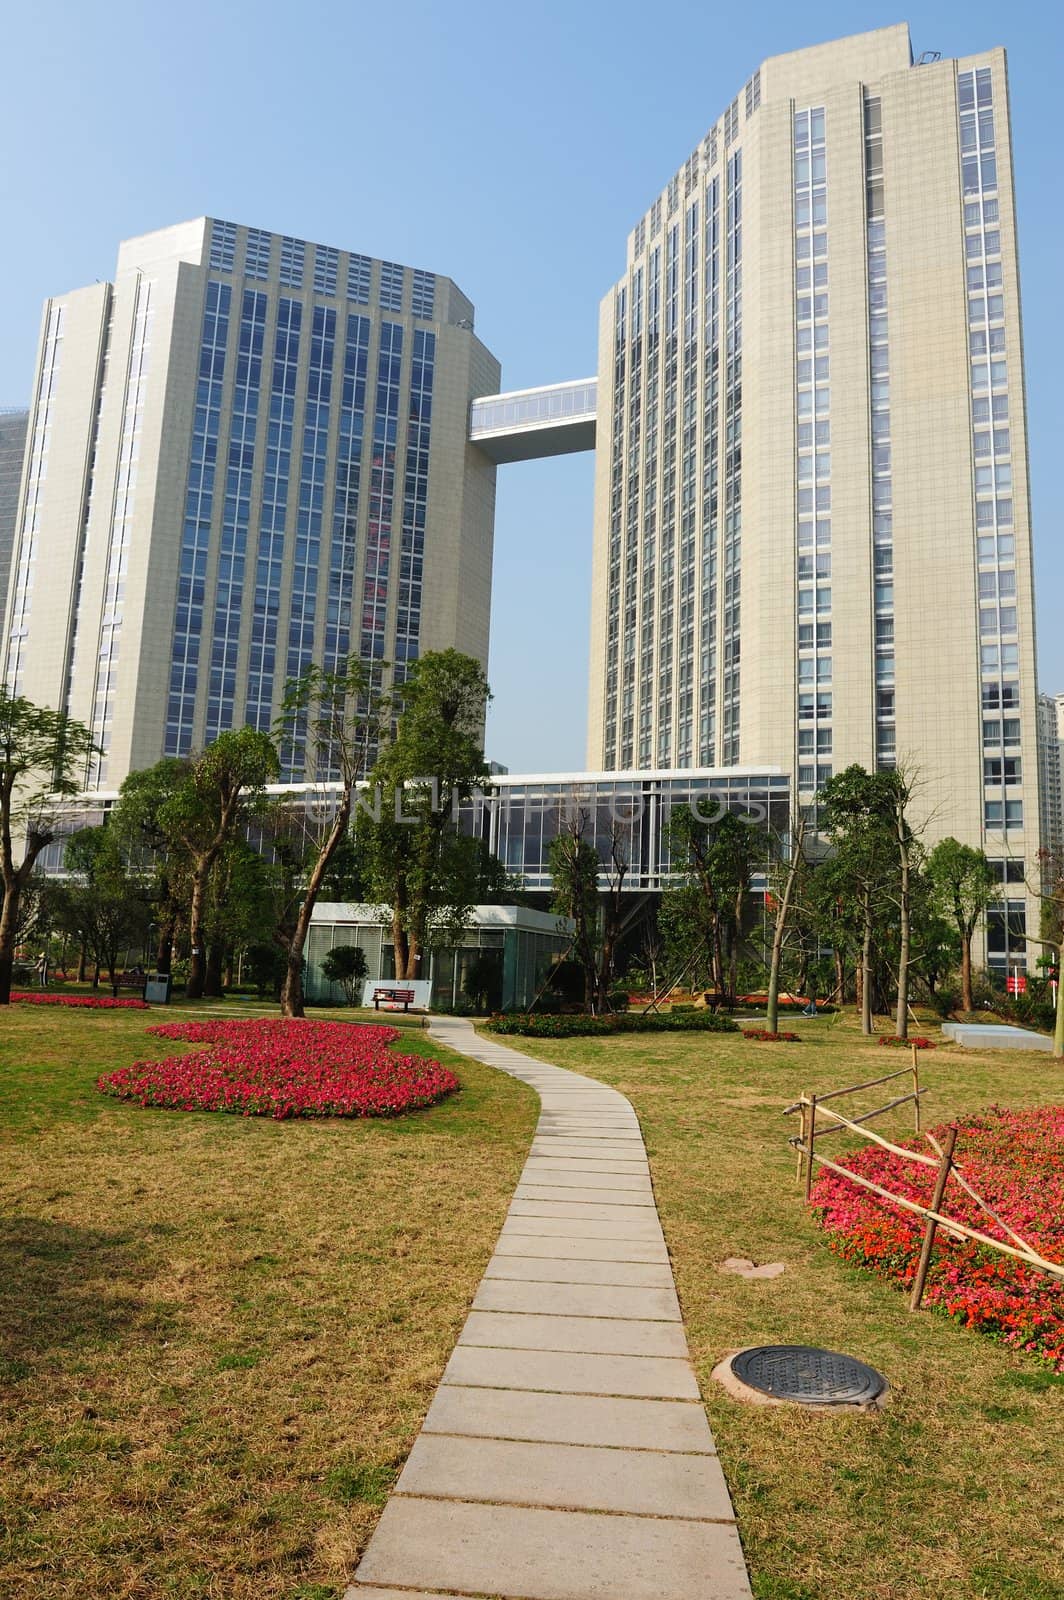 Path leading to buildings in Guangzhou Flower Citizen Plaza